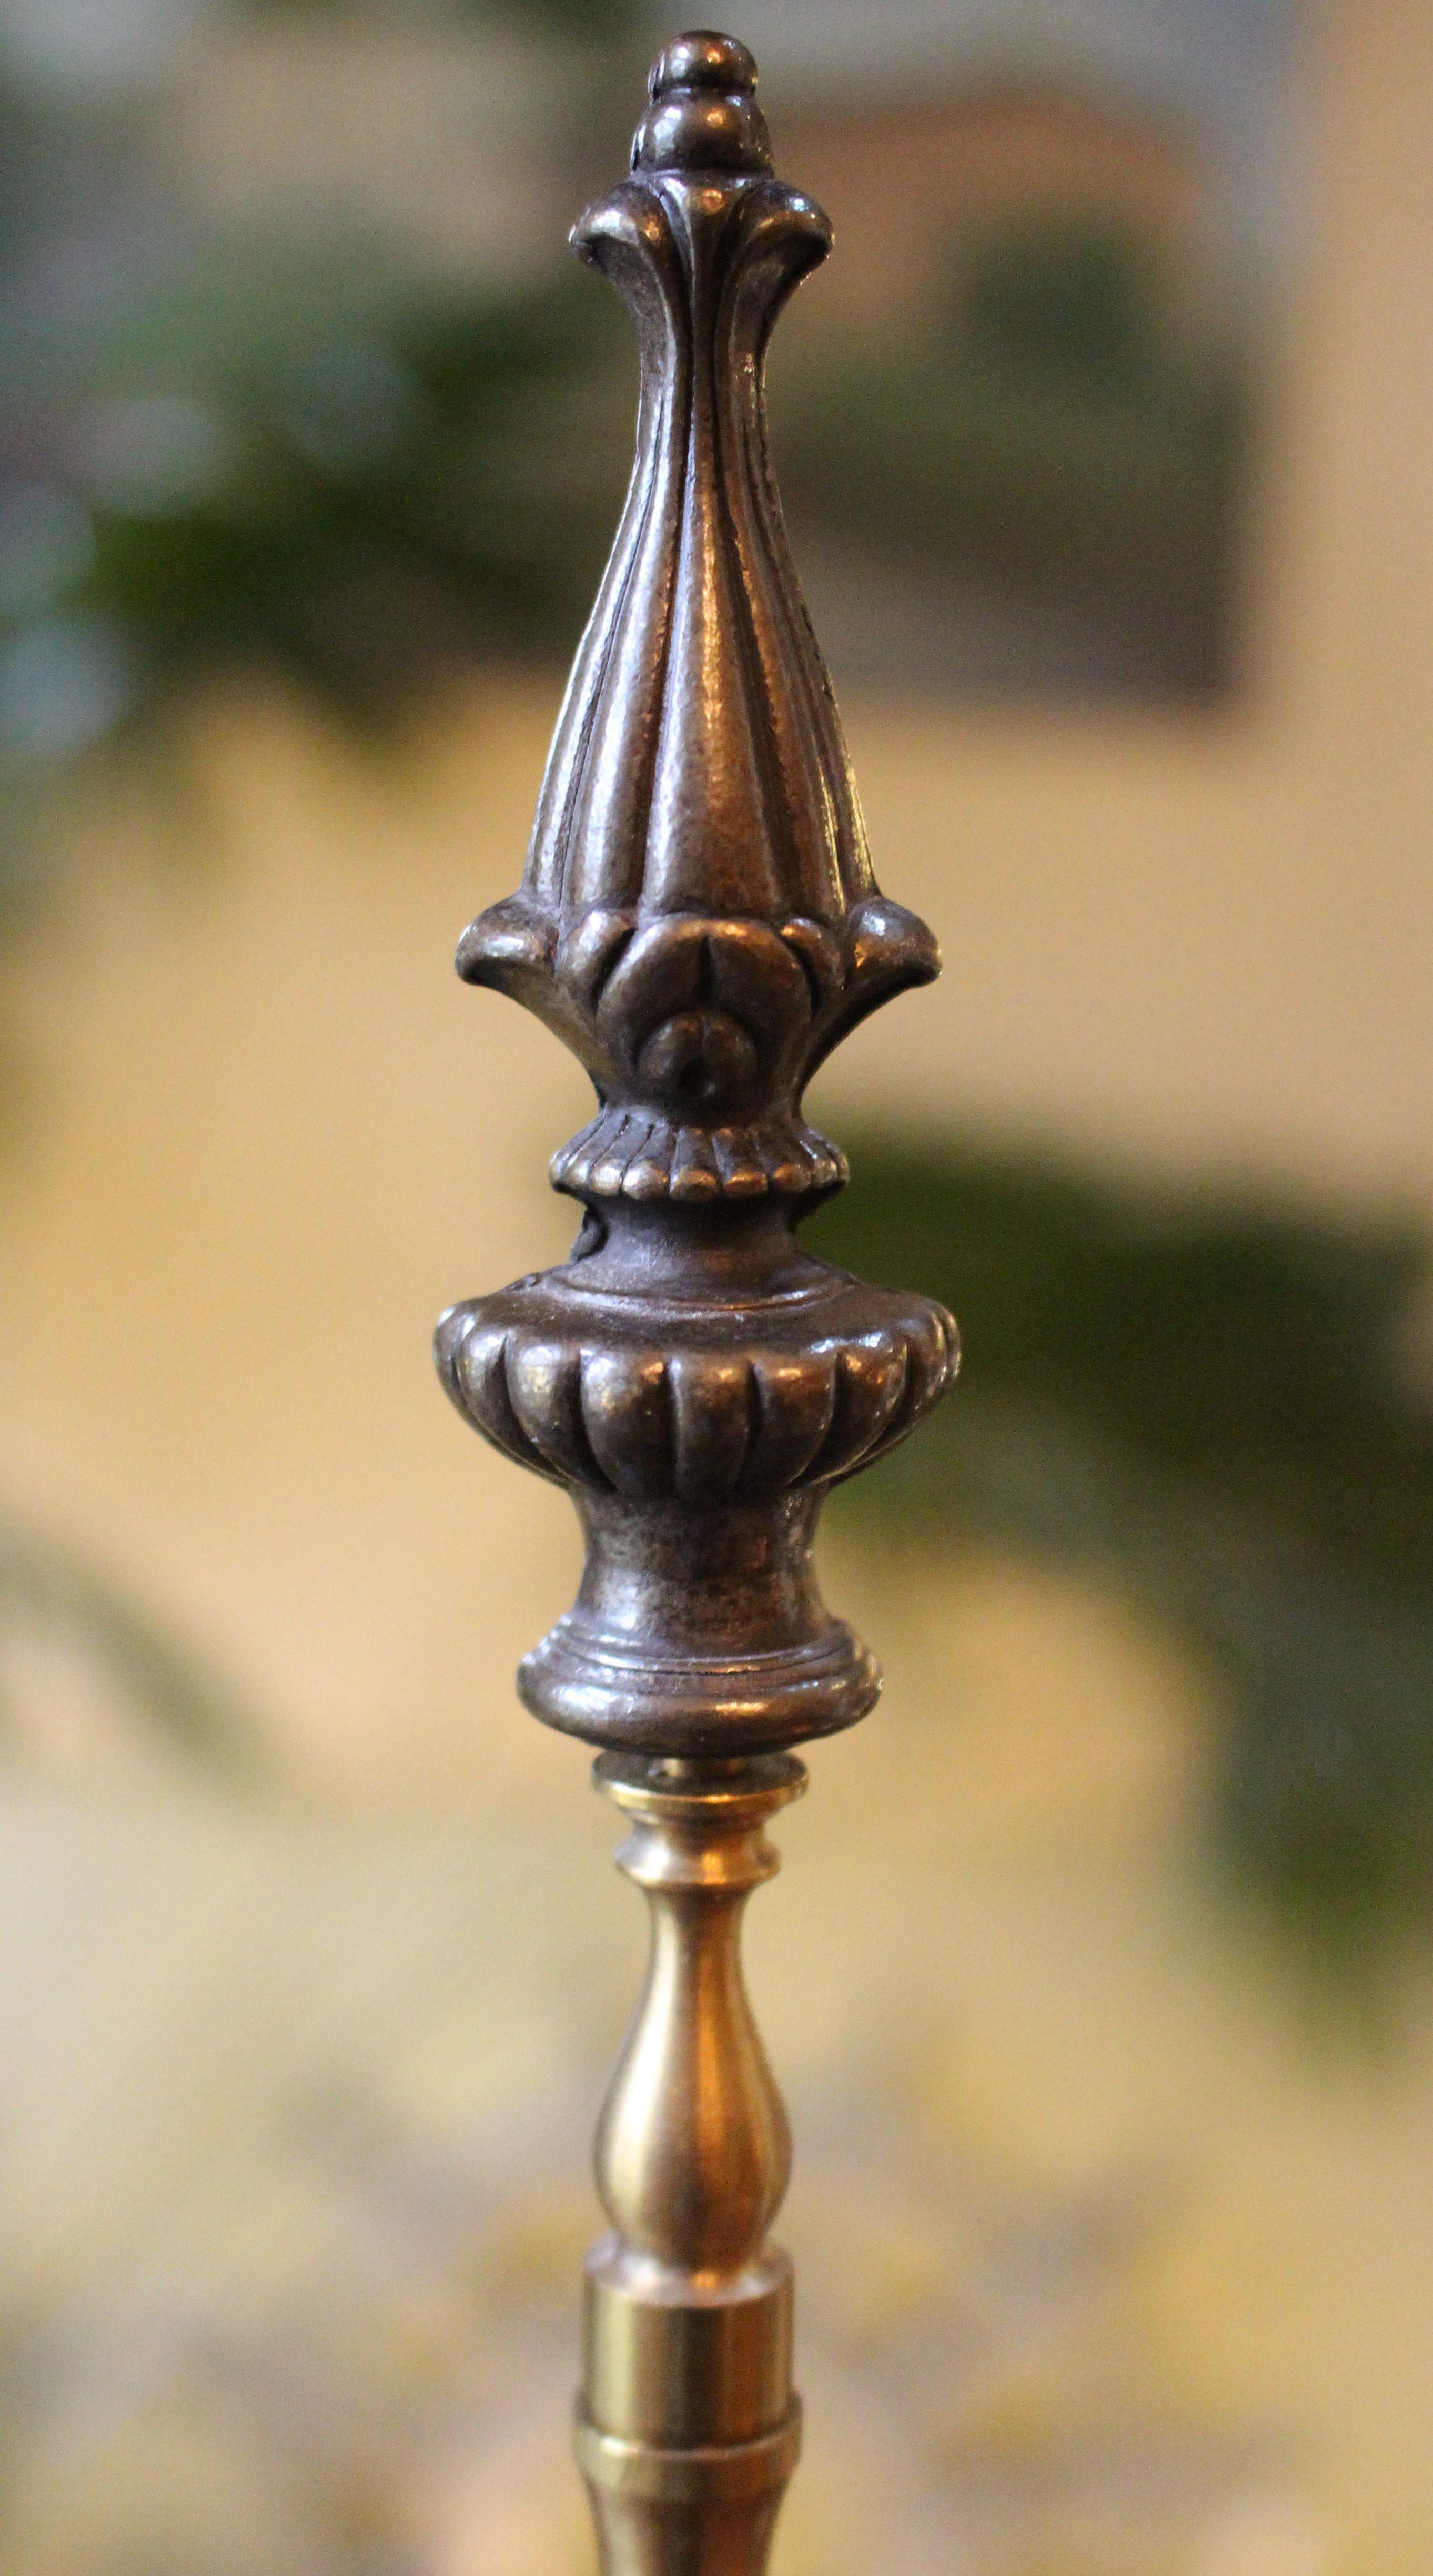 Circa 1845 English bronze oil lamp base now electrified. Note the great depth of cast motifs & fluted tapered column.
*Shade not included.
Measures: 5